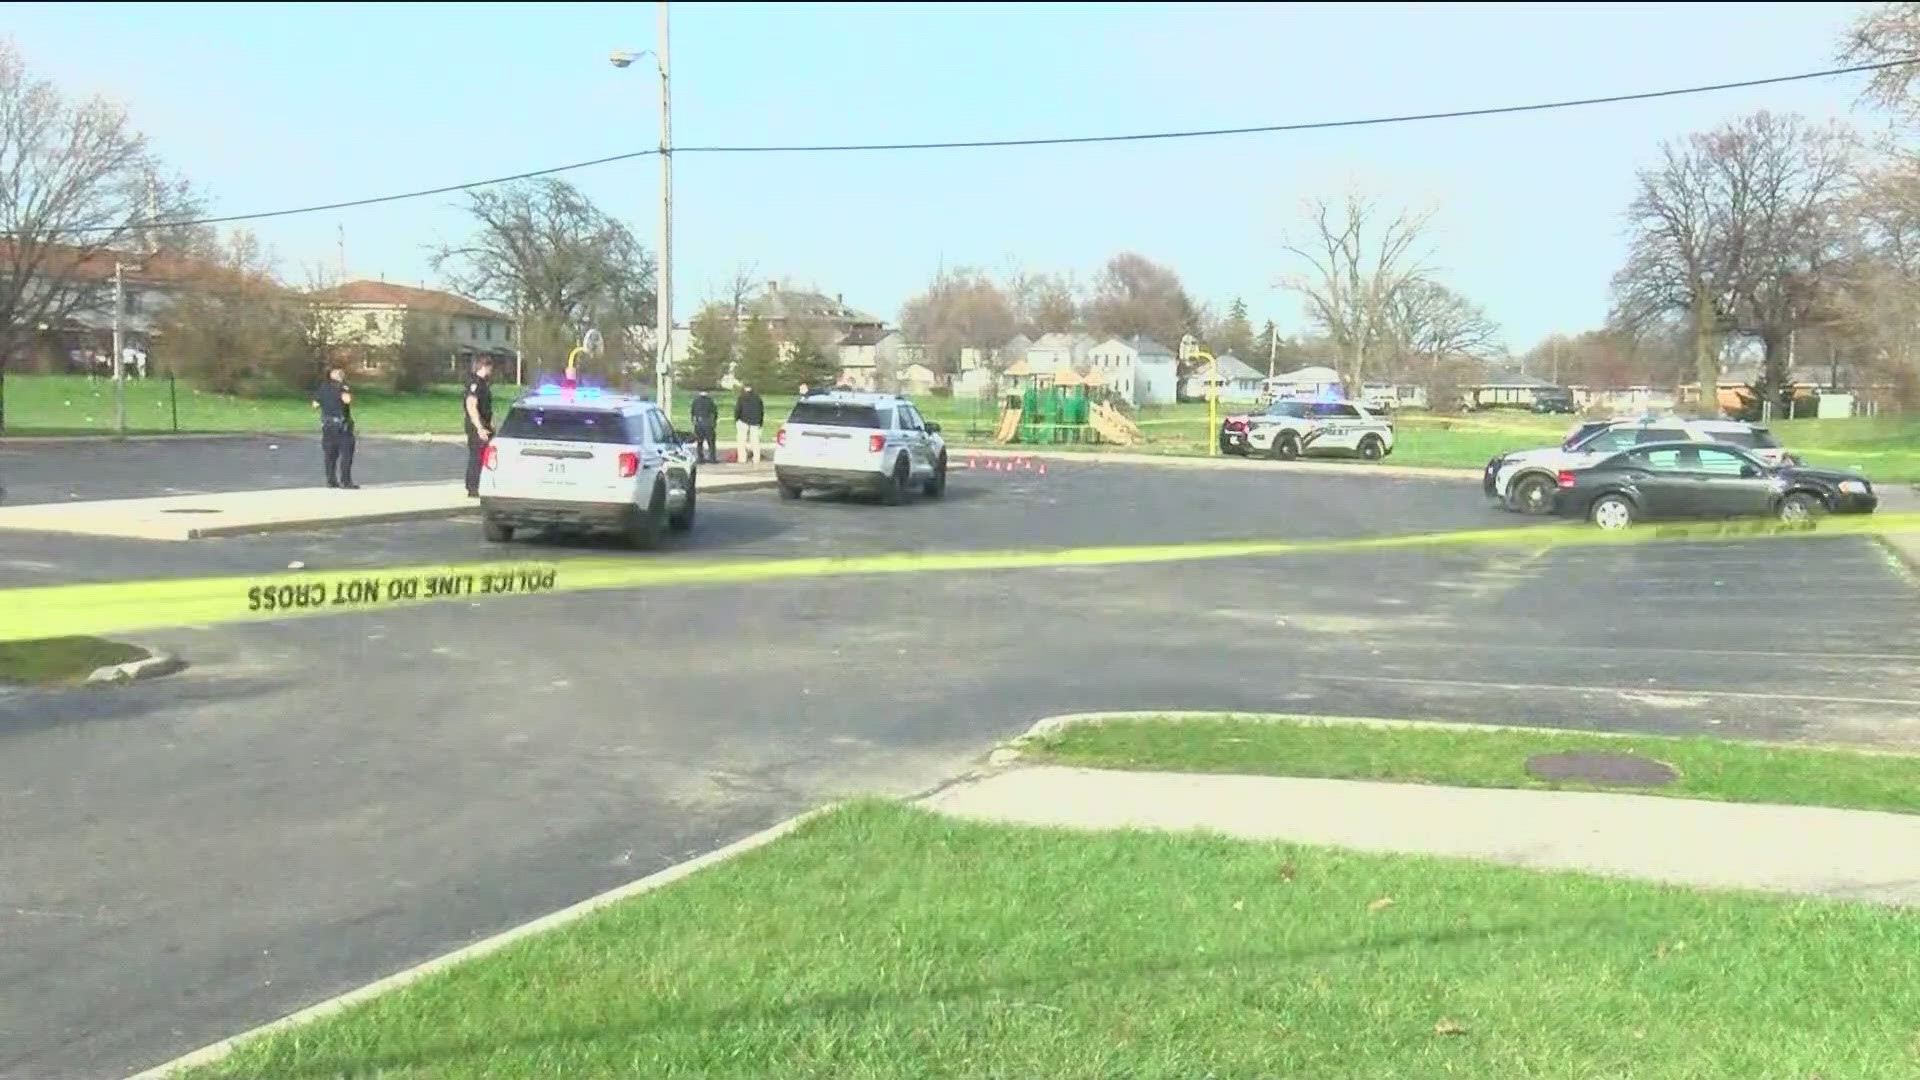 The shooting happened just after 5 p.m. Monday in a parking lot at Ravine Park. The victim, described by Toledo police as a juvenile male, died from his injuries.